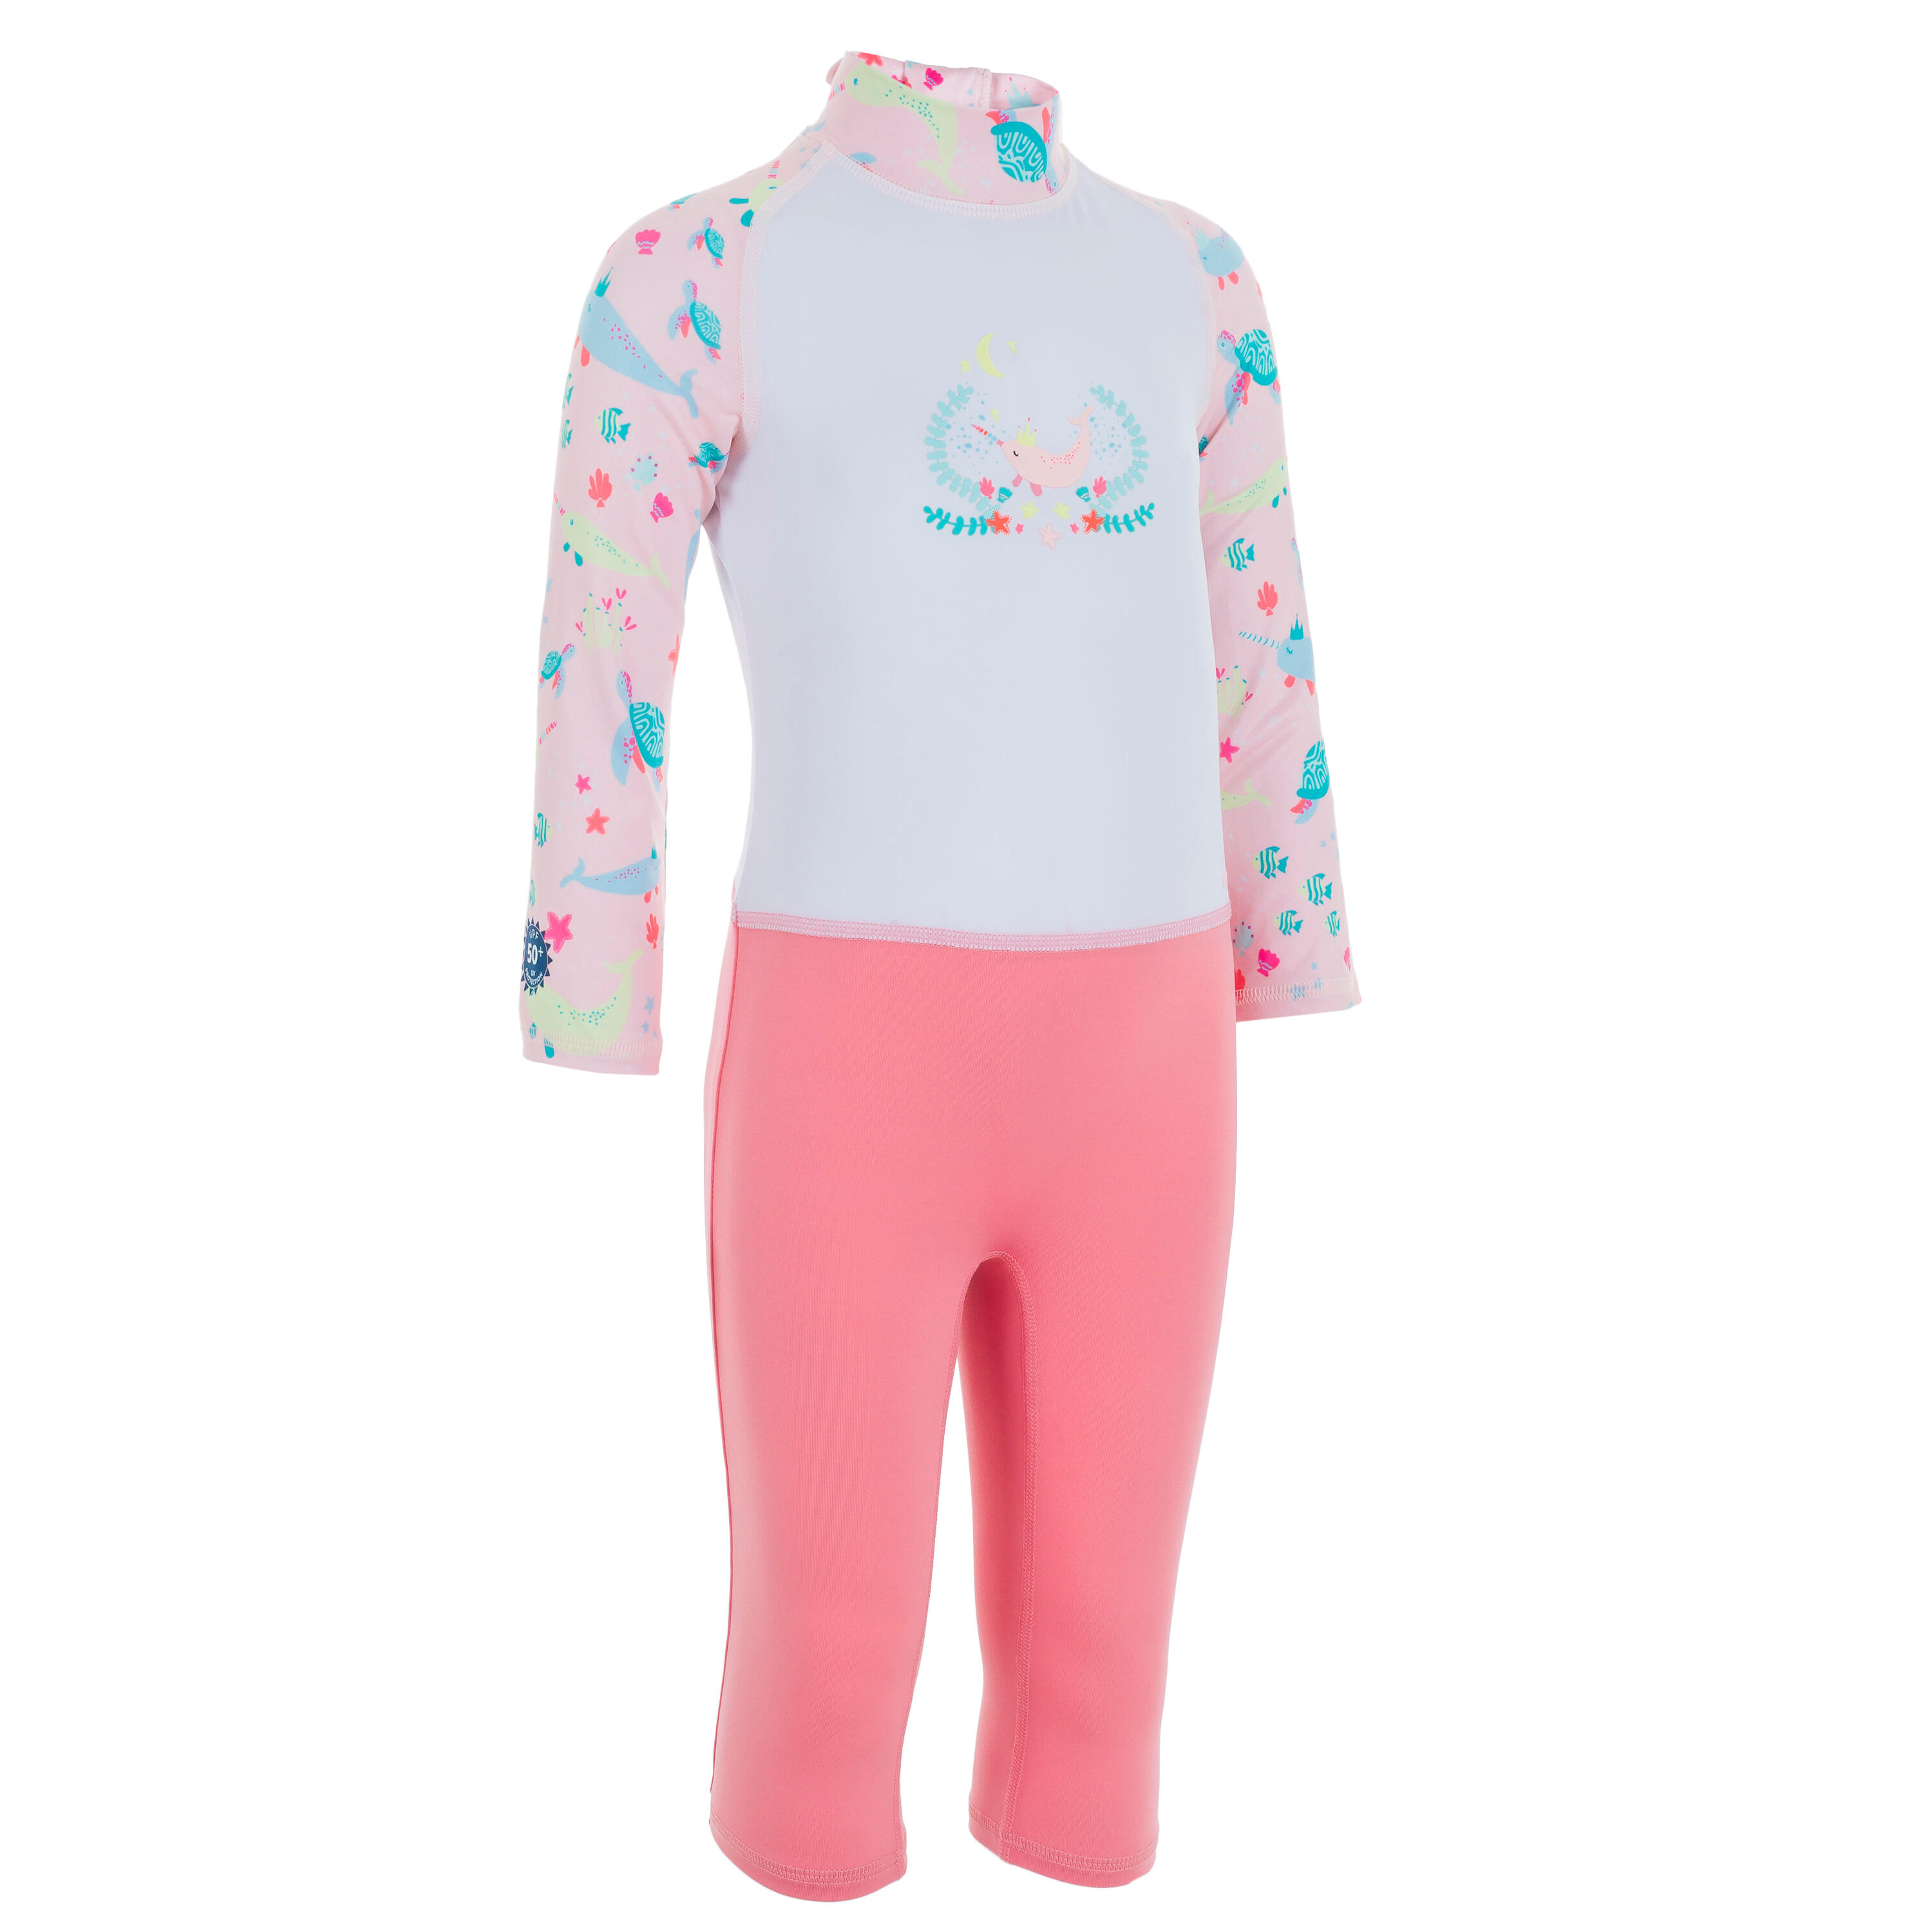 Baby / Kids' Swimming Long Sleeve UV-Protection Suit - Pink Print 1/8